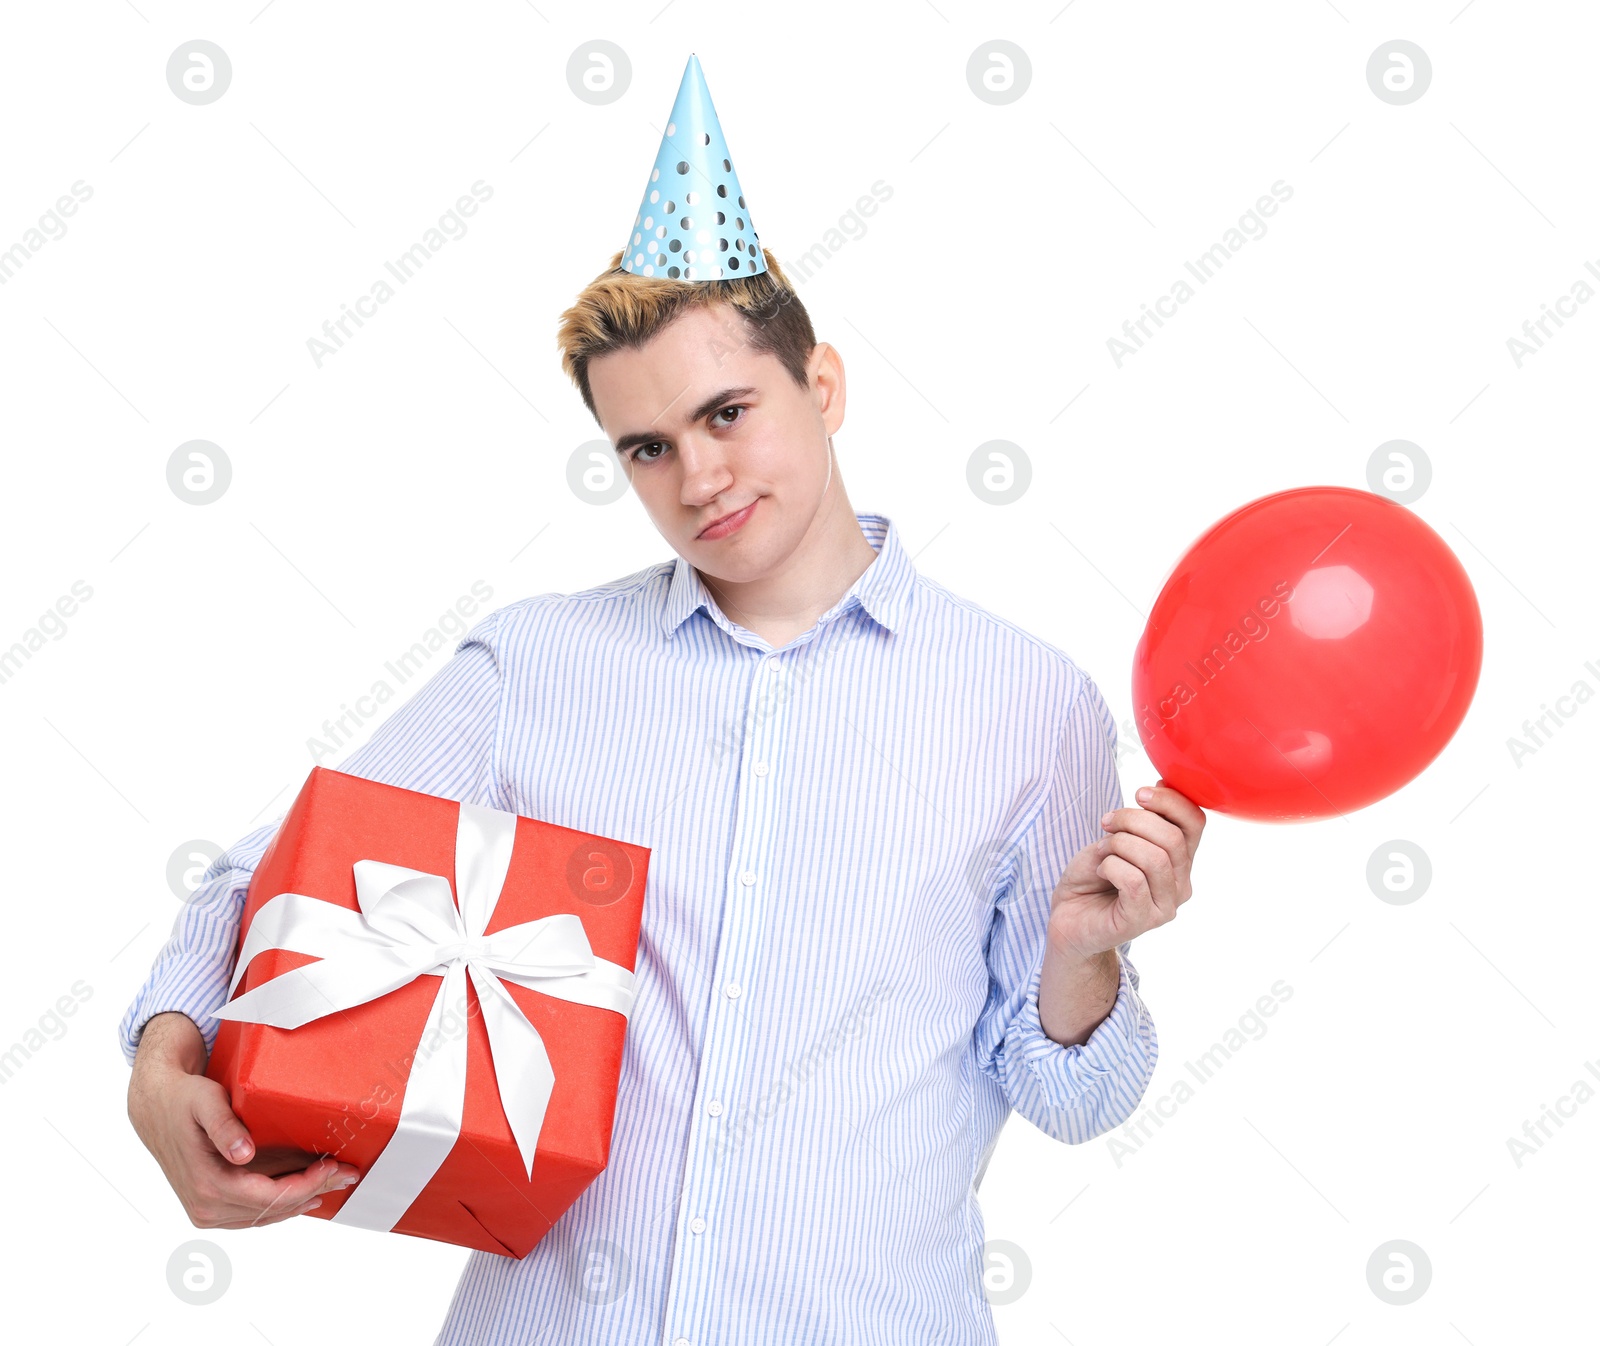 Photo of Sad young man with party hat, gift box and balloon on white background